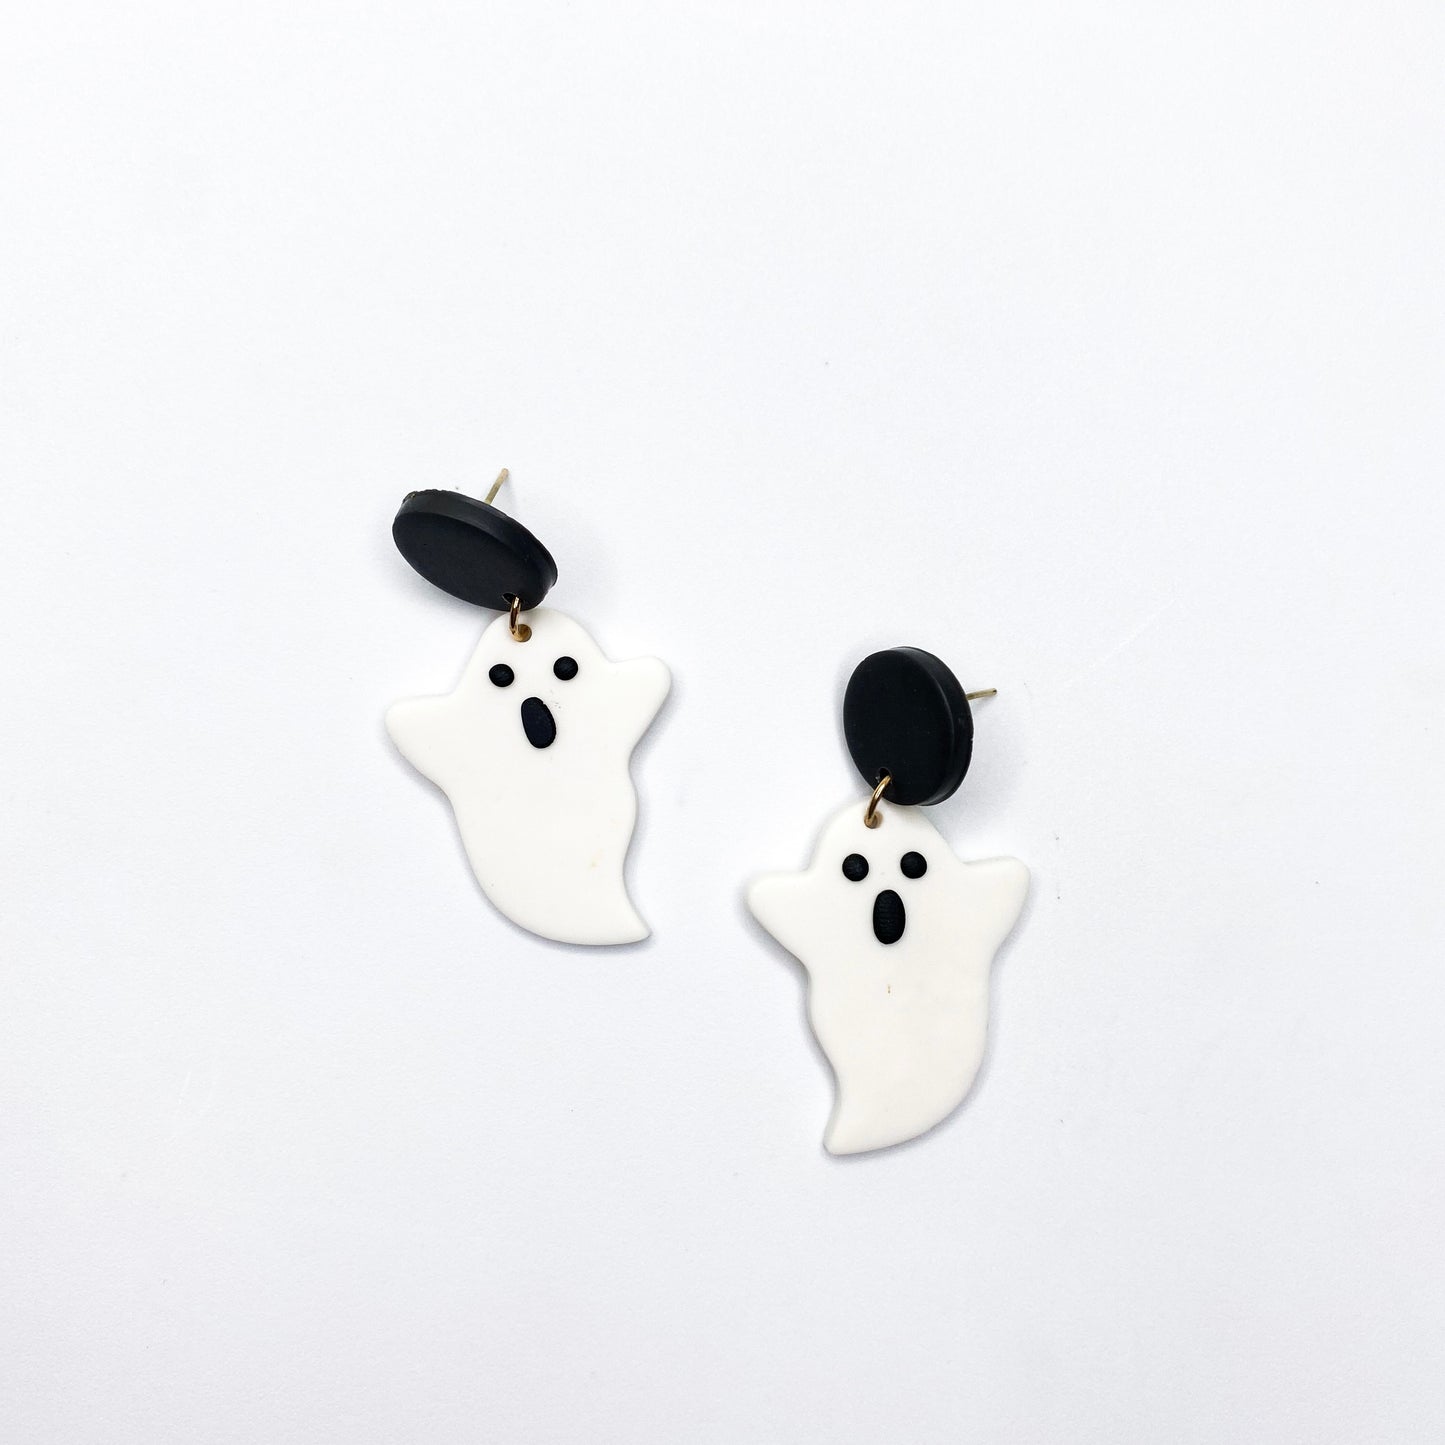 Clay Ghosts